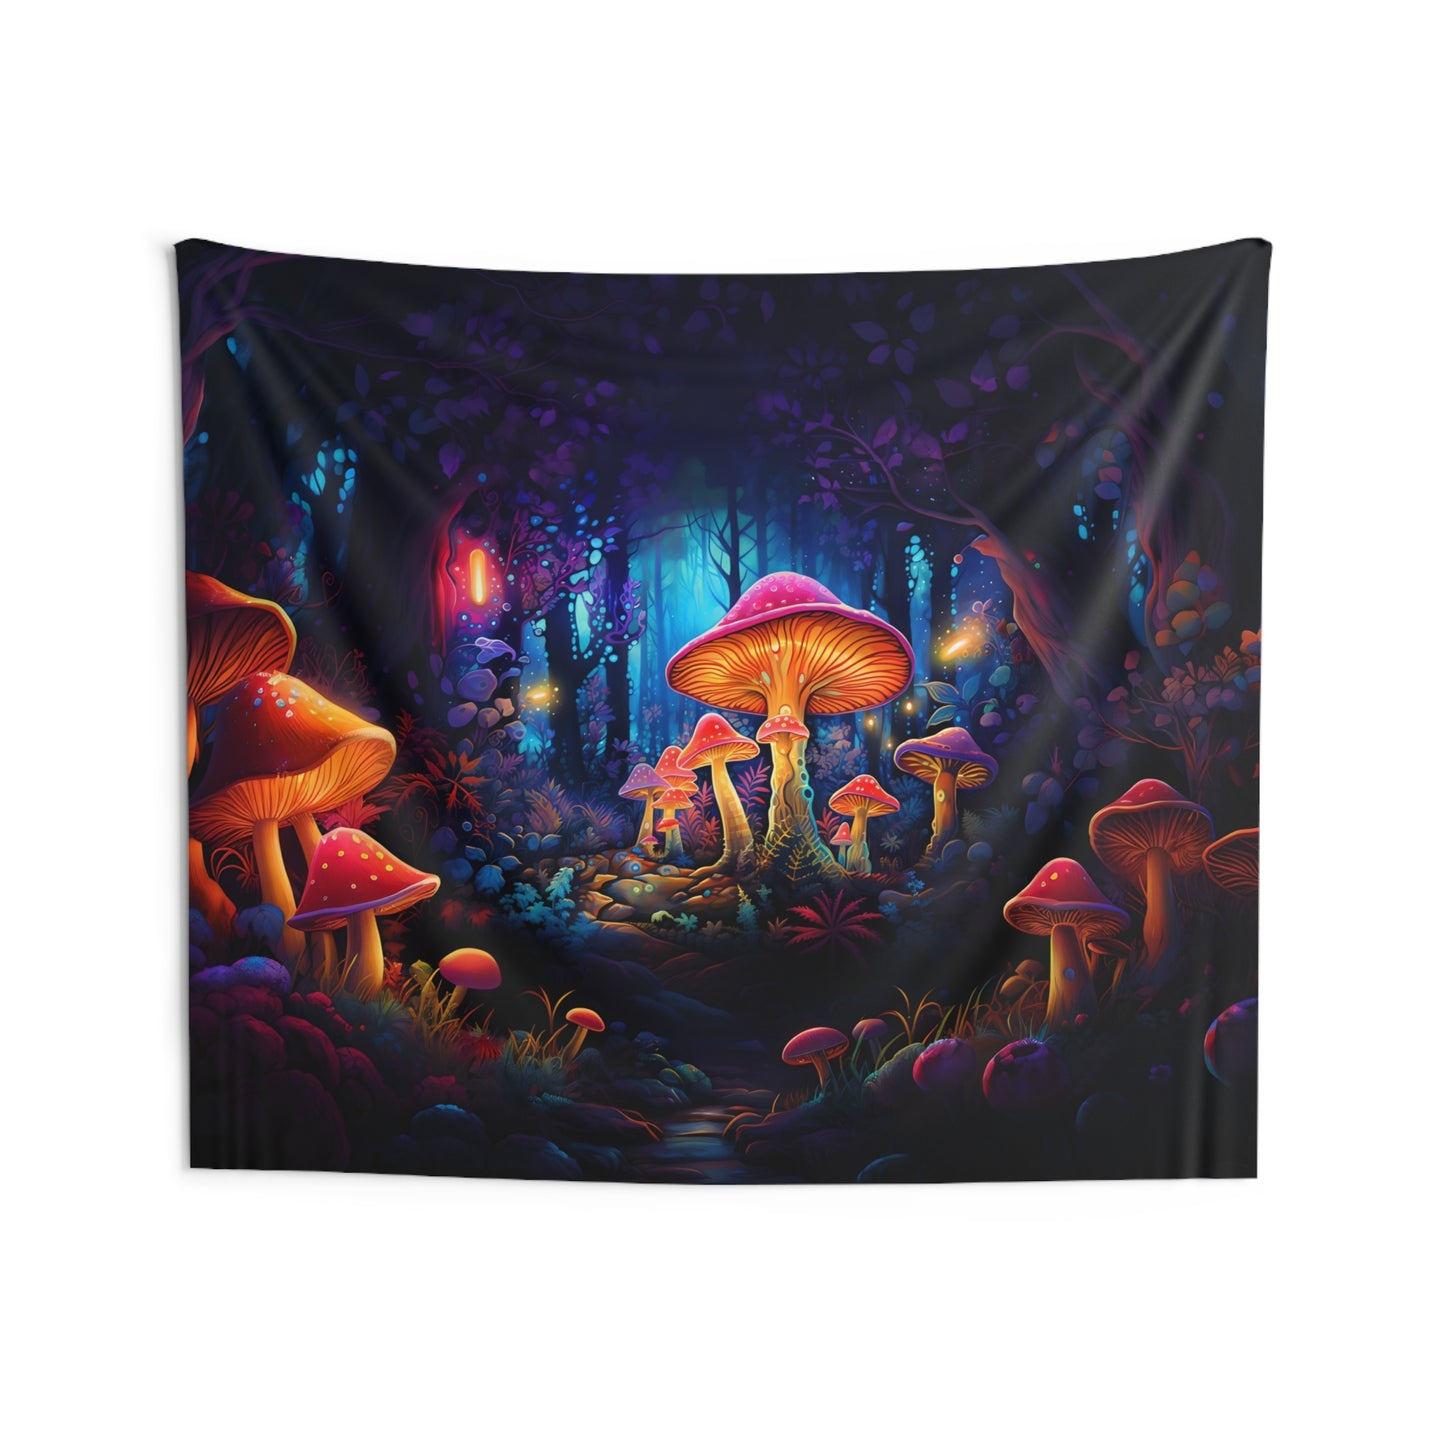 Mystical Forest Glow Mushroom Tapestry | Living Room, College Dorm | Witchy, Cottagecore, Goblincore Aesthetic | Gift Idea